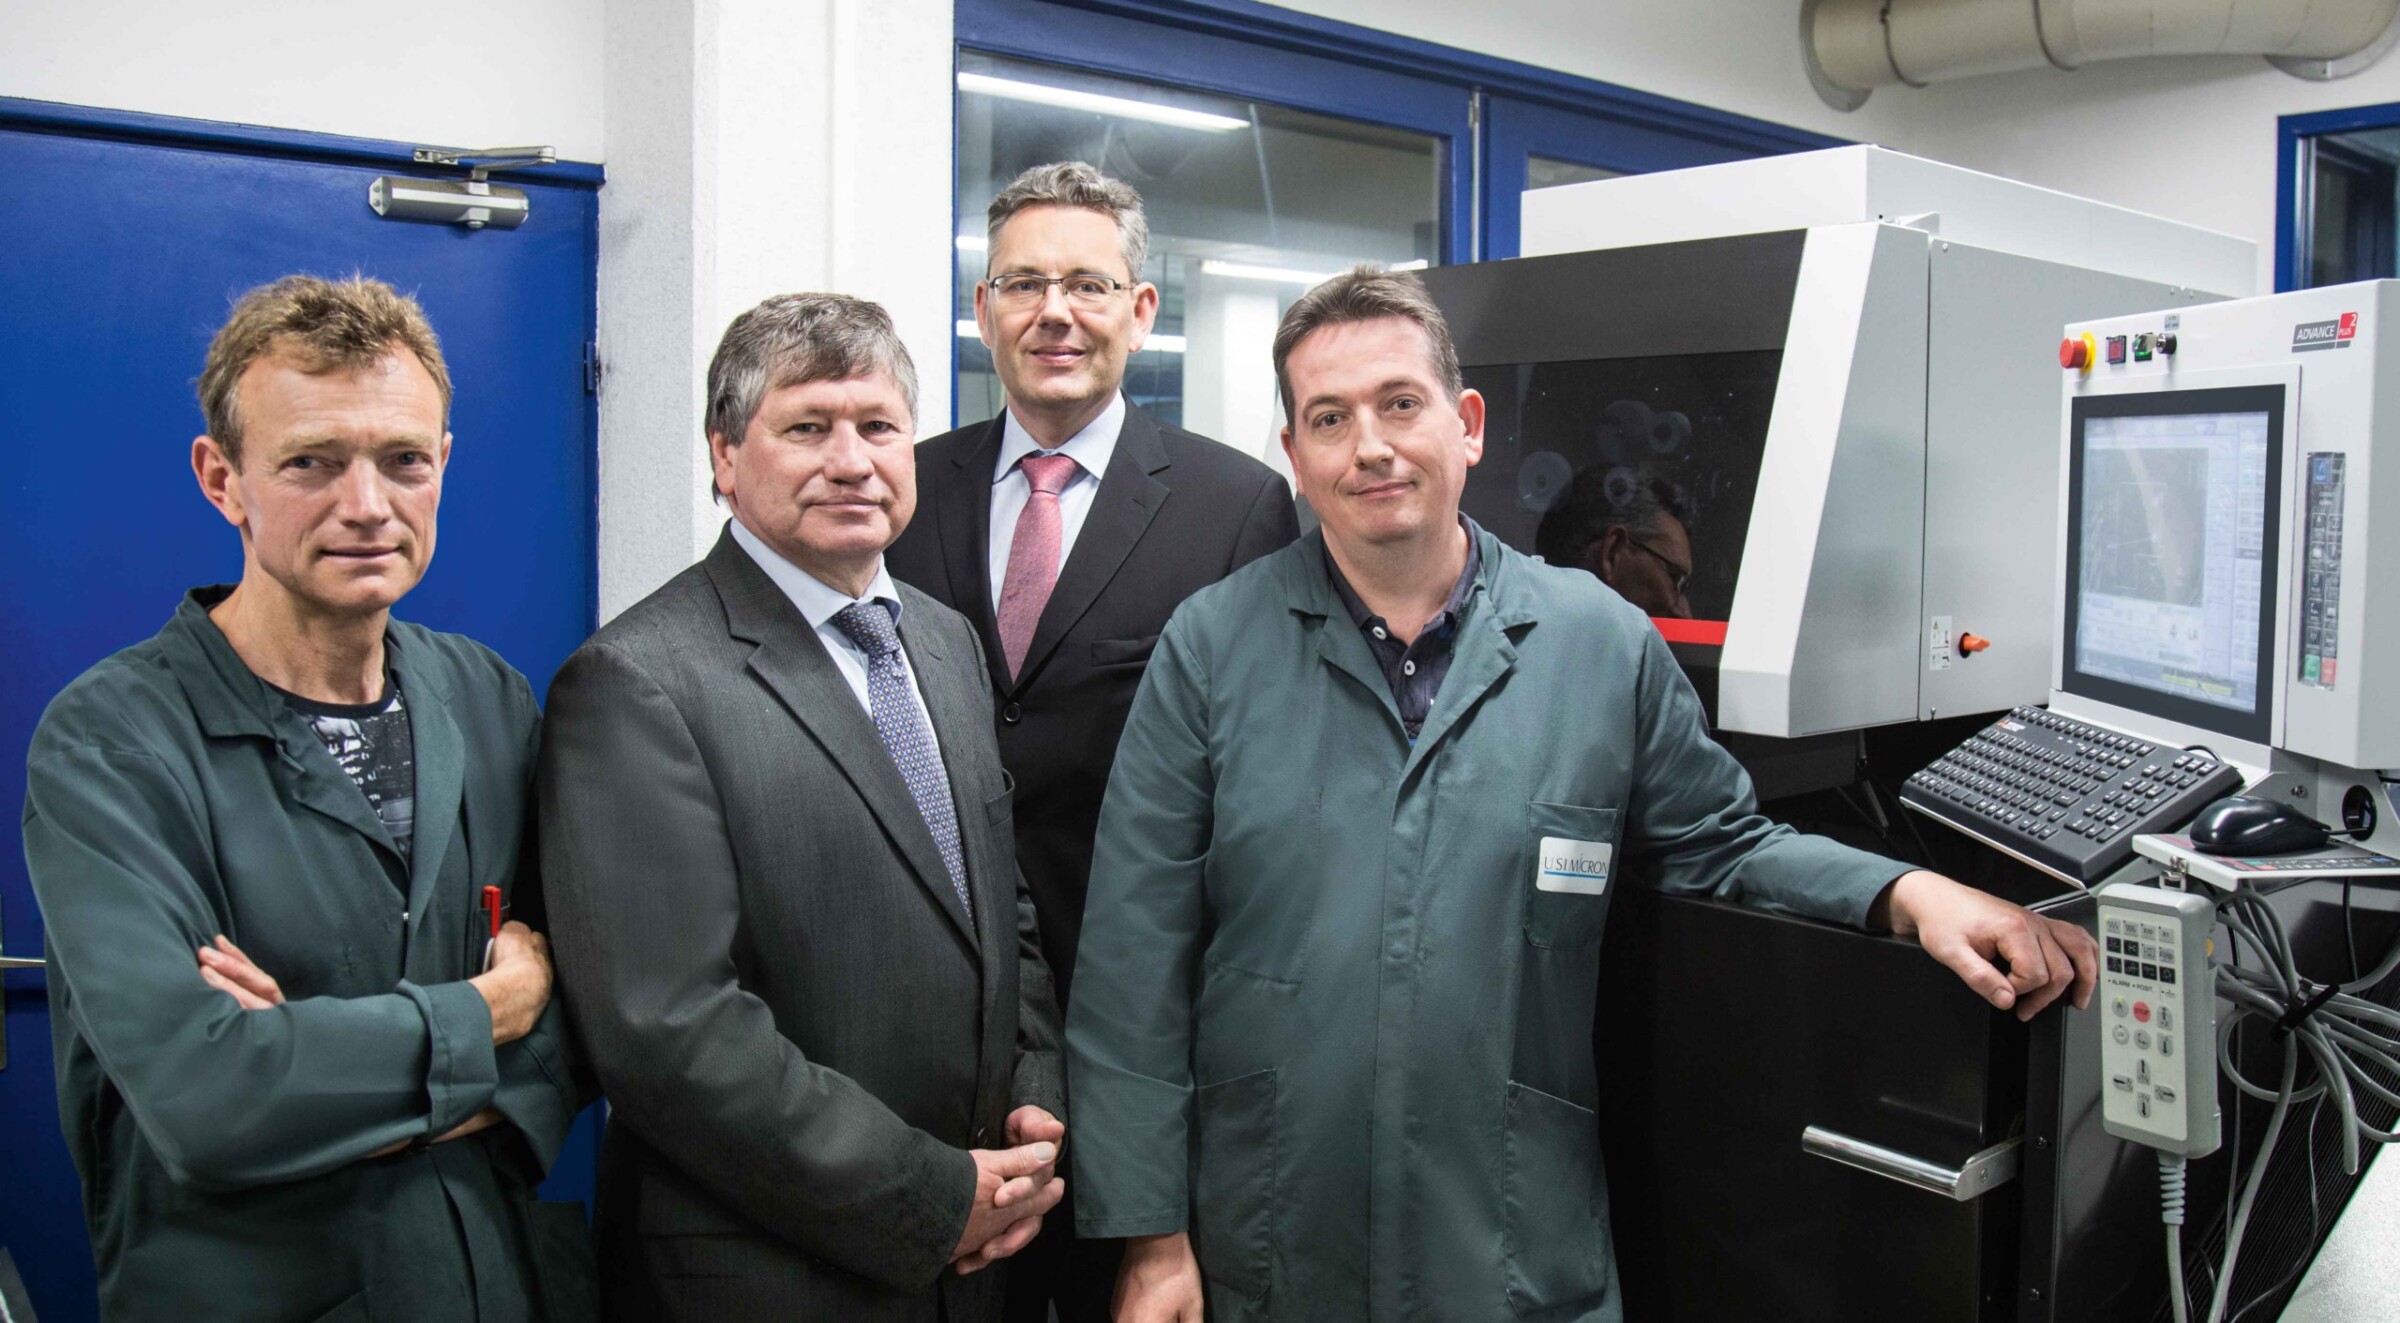 Alain Perrenoud, USIMICRON; Joël Martin, Product Manager for EDM systems from Mitsubishi Electric at exclusive dealer Delta Machines in France; Kersten Juhls, Regional Sales Manager for EDM systems at Mitsubishi Electric; and Sébastien Devernay, USIMICRON, have collectively chosen the MV1200R, the best-possible machining solution for USIMICRON.